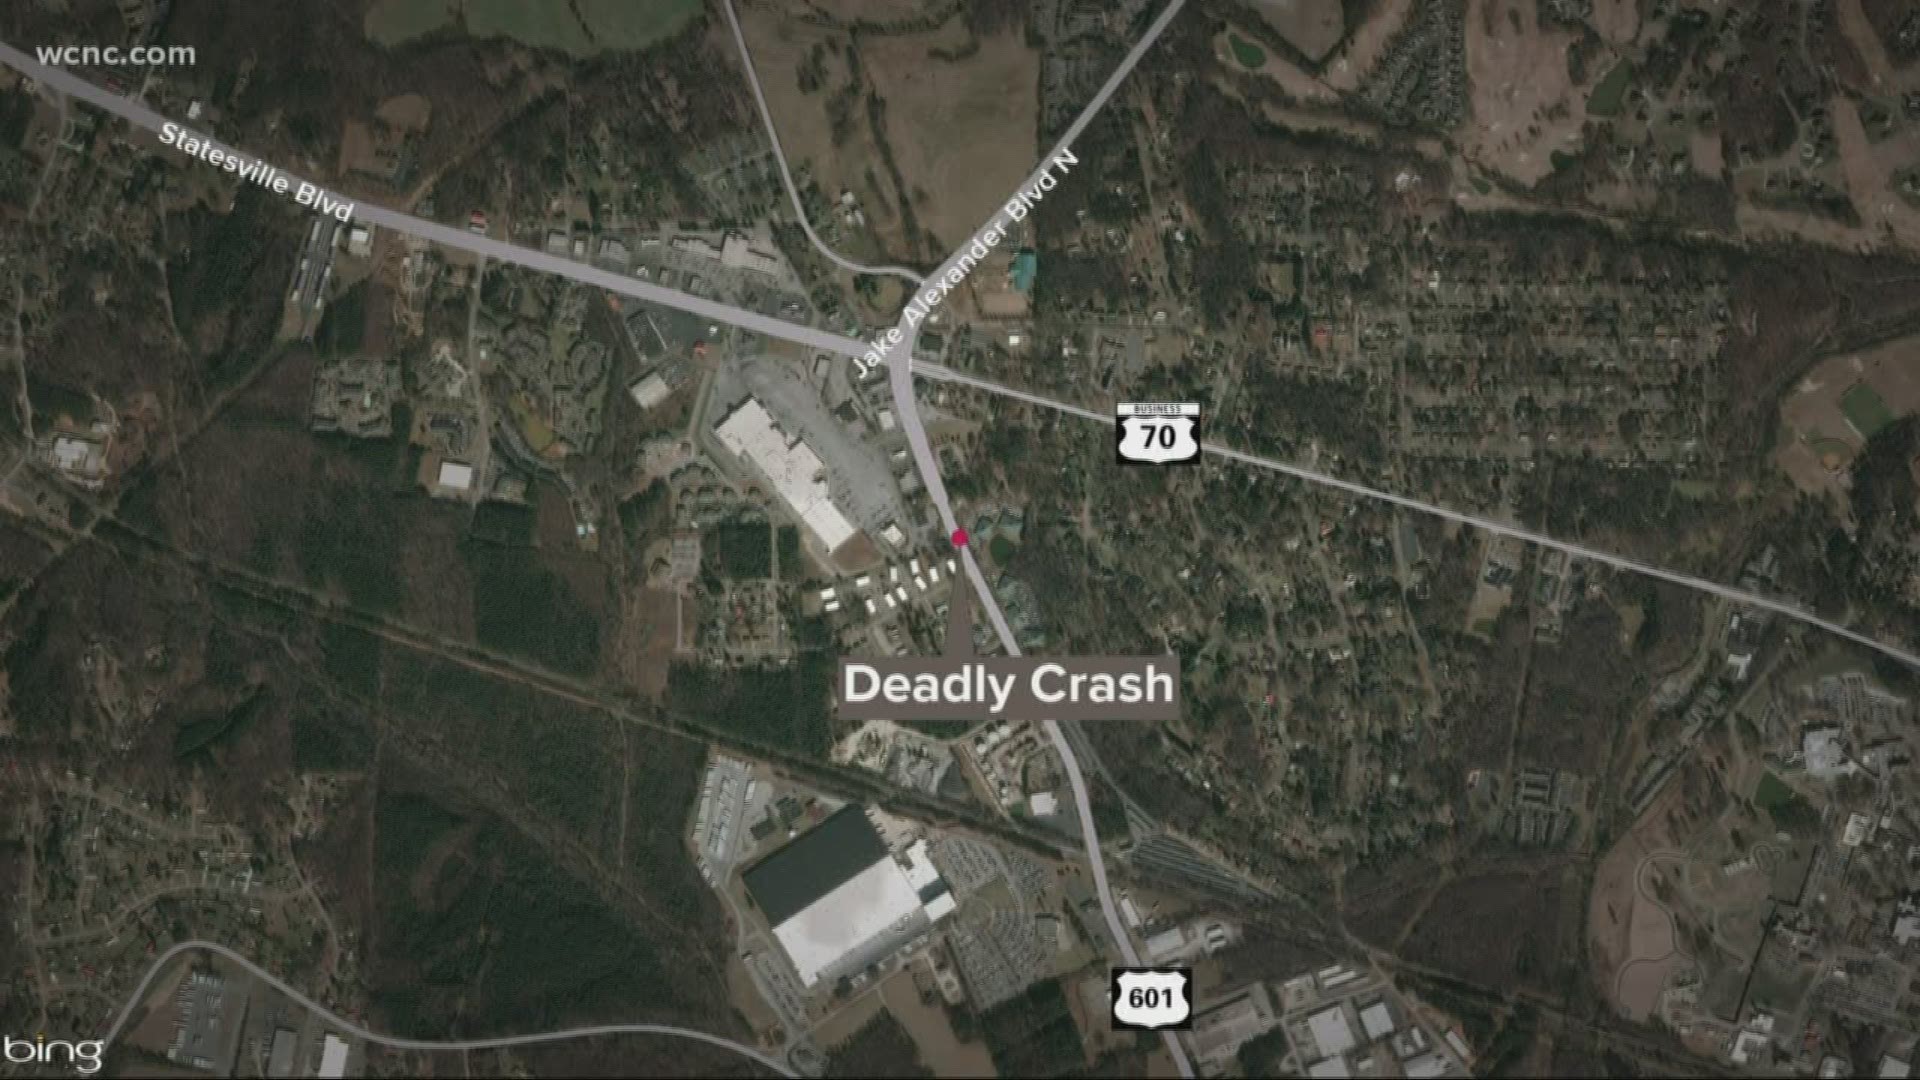 One person has died and three are possibly injured after an accident in Salisbury, NC on Sunday night.